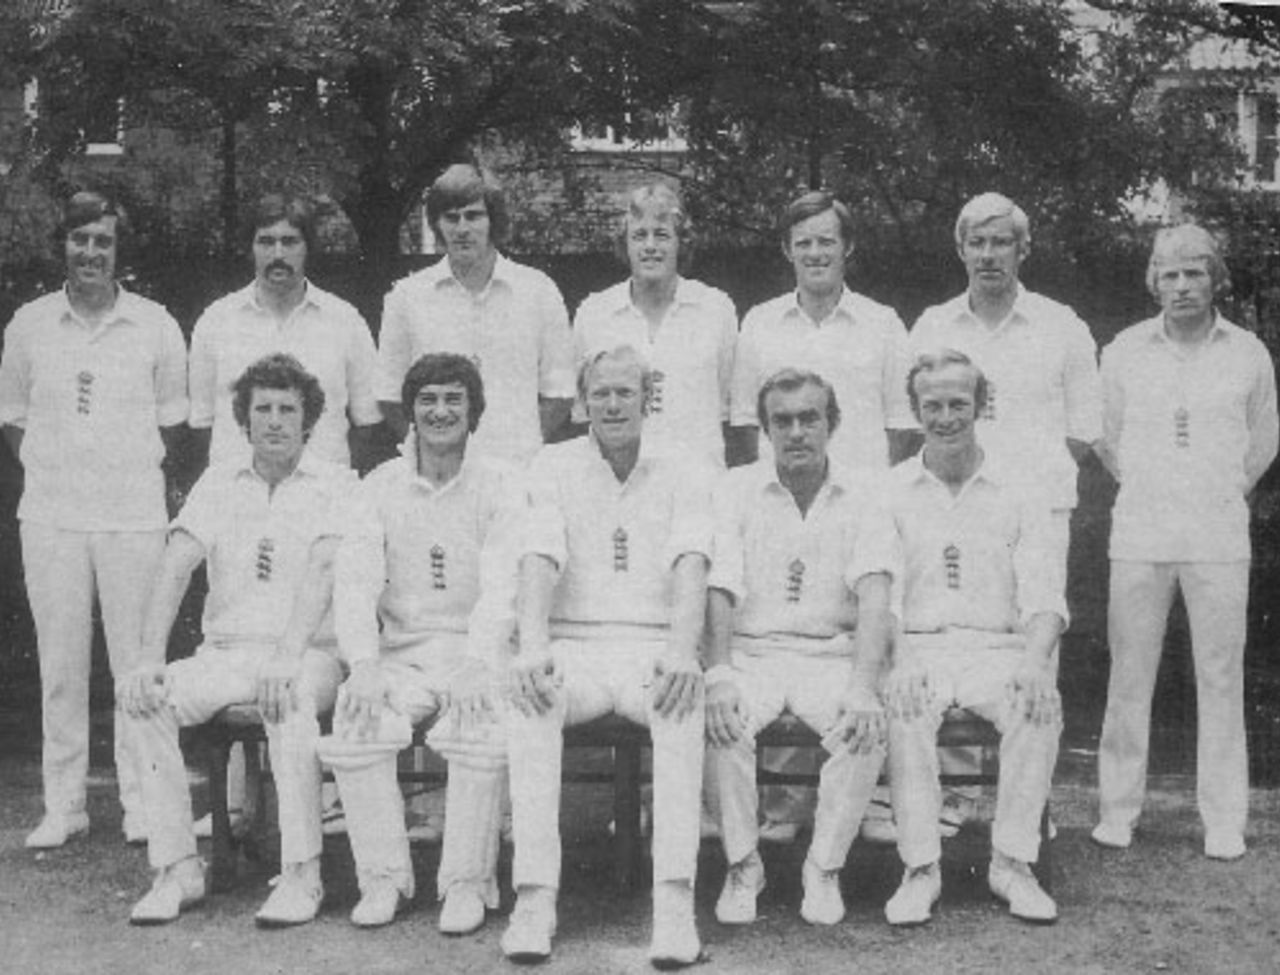 The England side for the second Test at Lord's in 1975 -  Tony Greig's first as captain